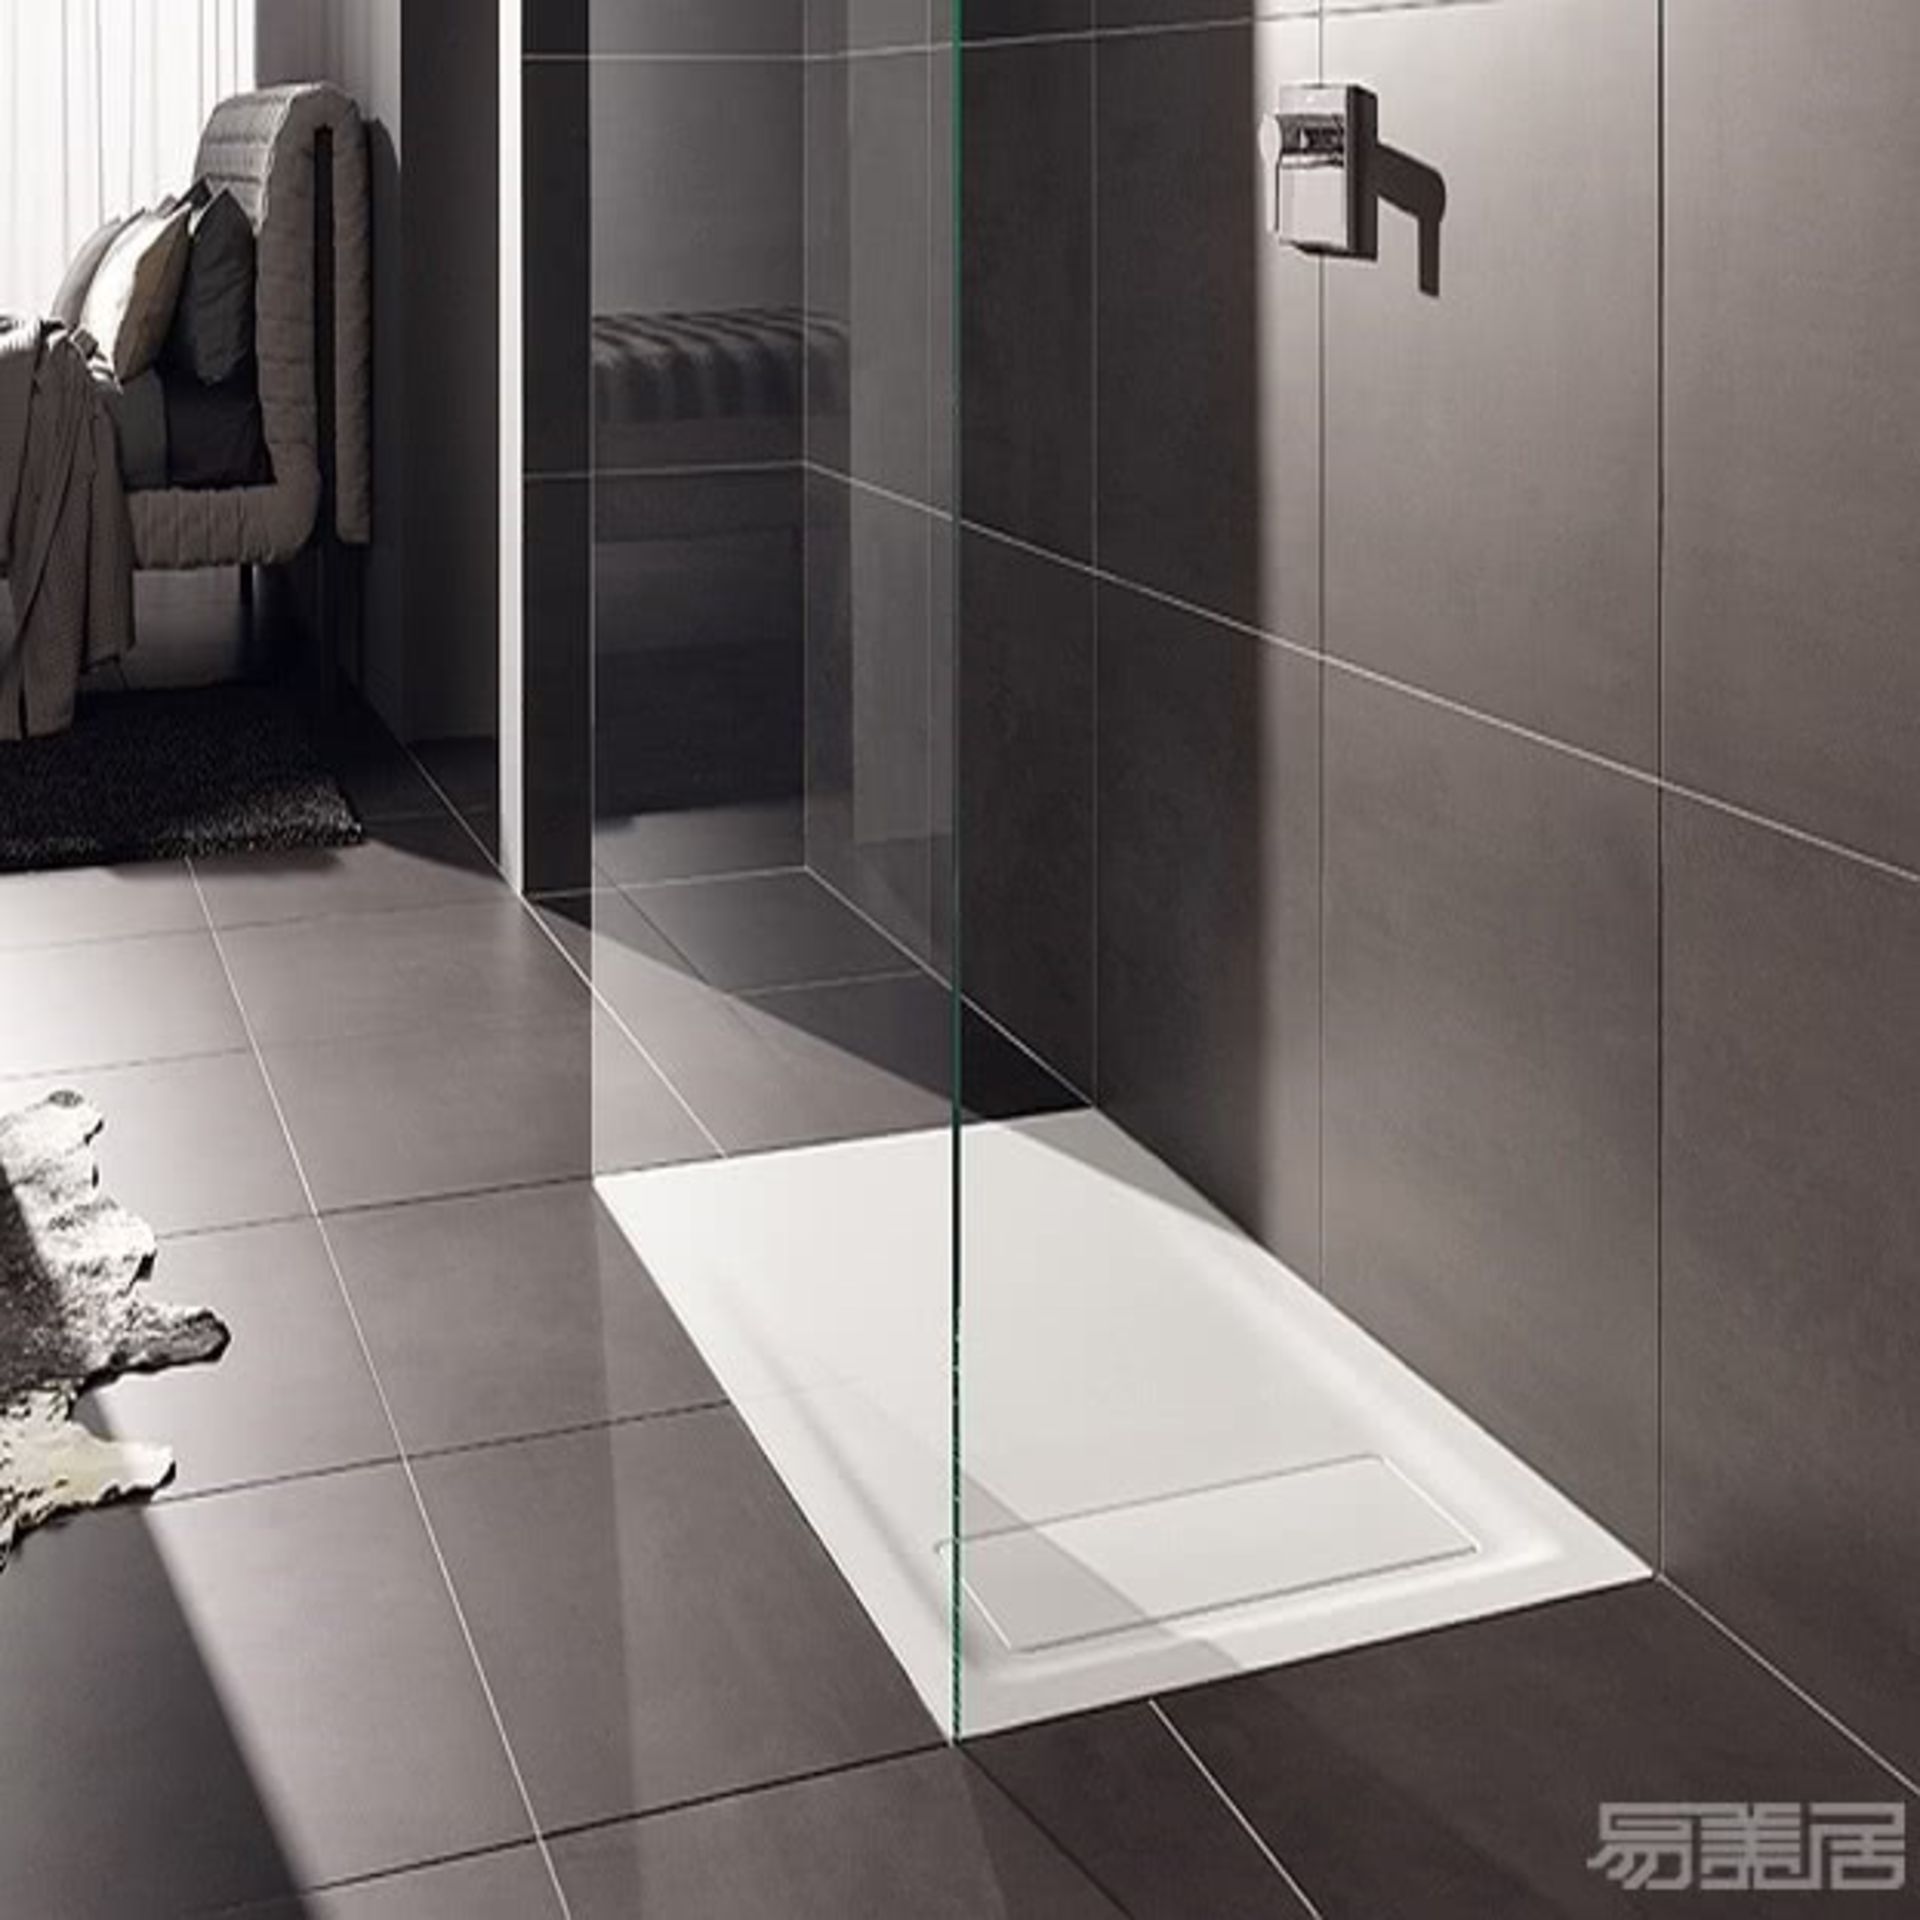 (VD126) 1600x900mm Keramag Opale Shower Tray. RRP £1,084.99.Opale is simple, slim and with a t... - Image 2 of 3